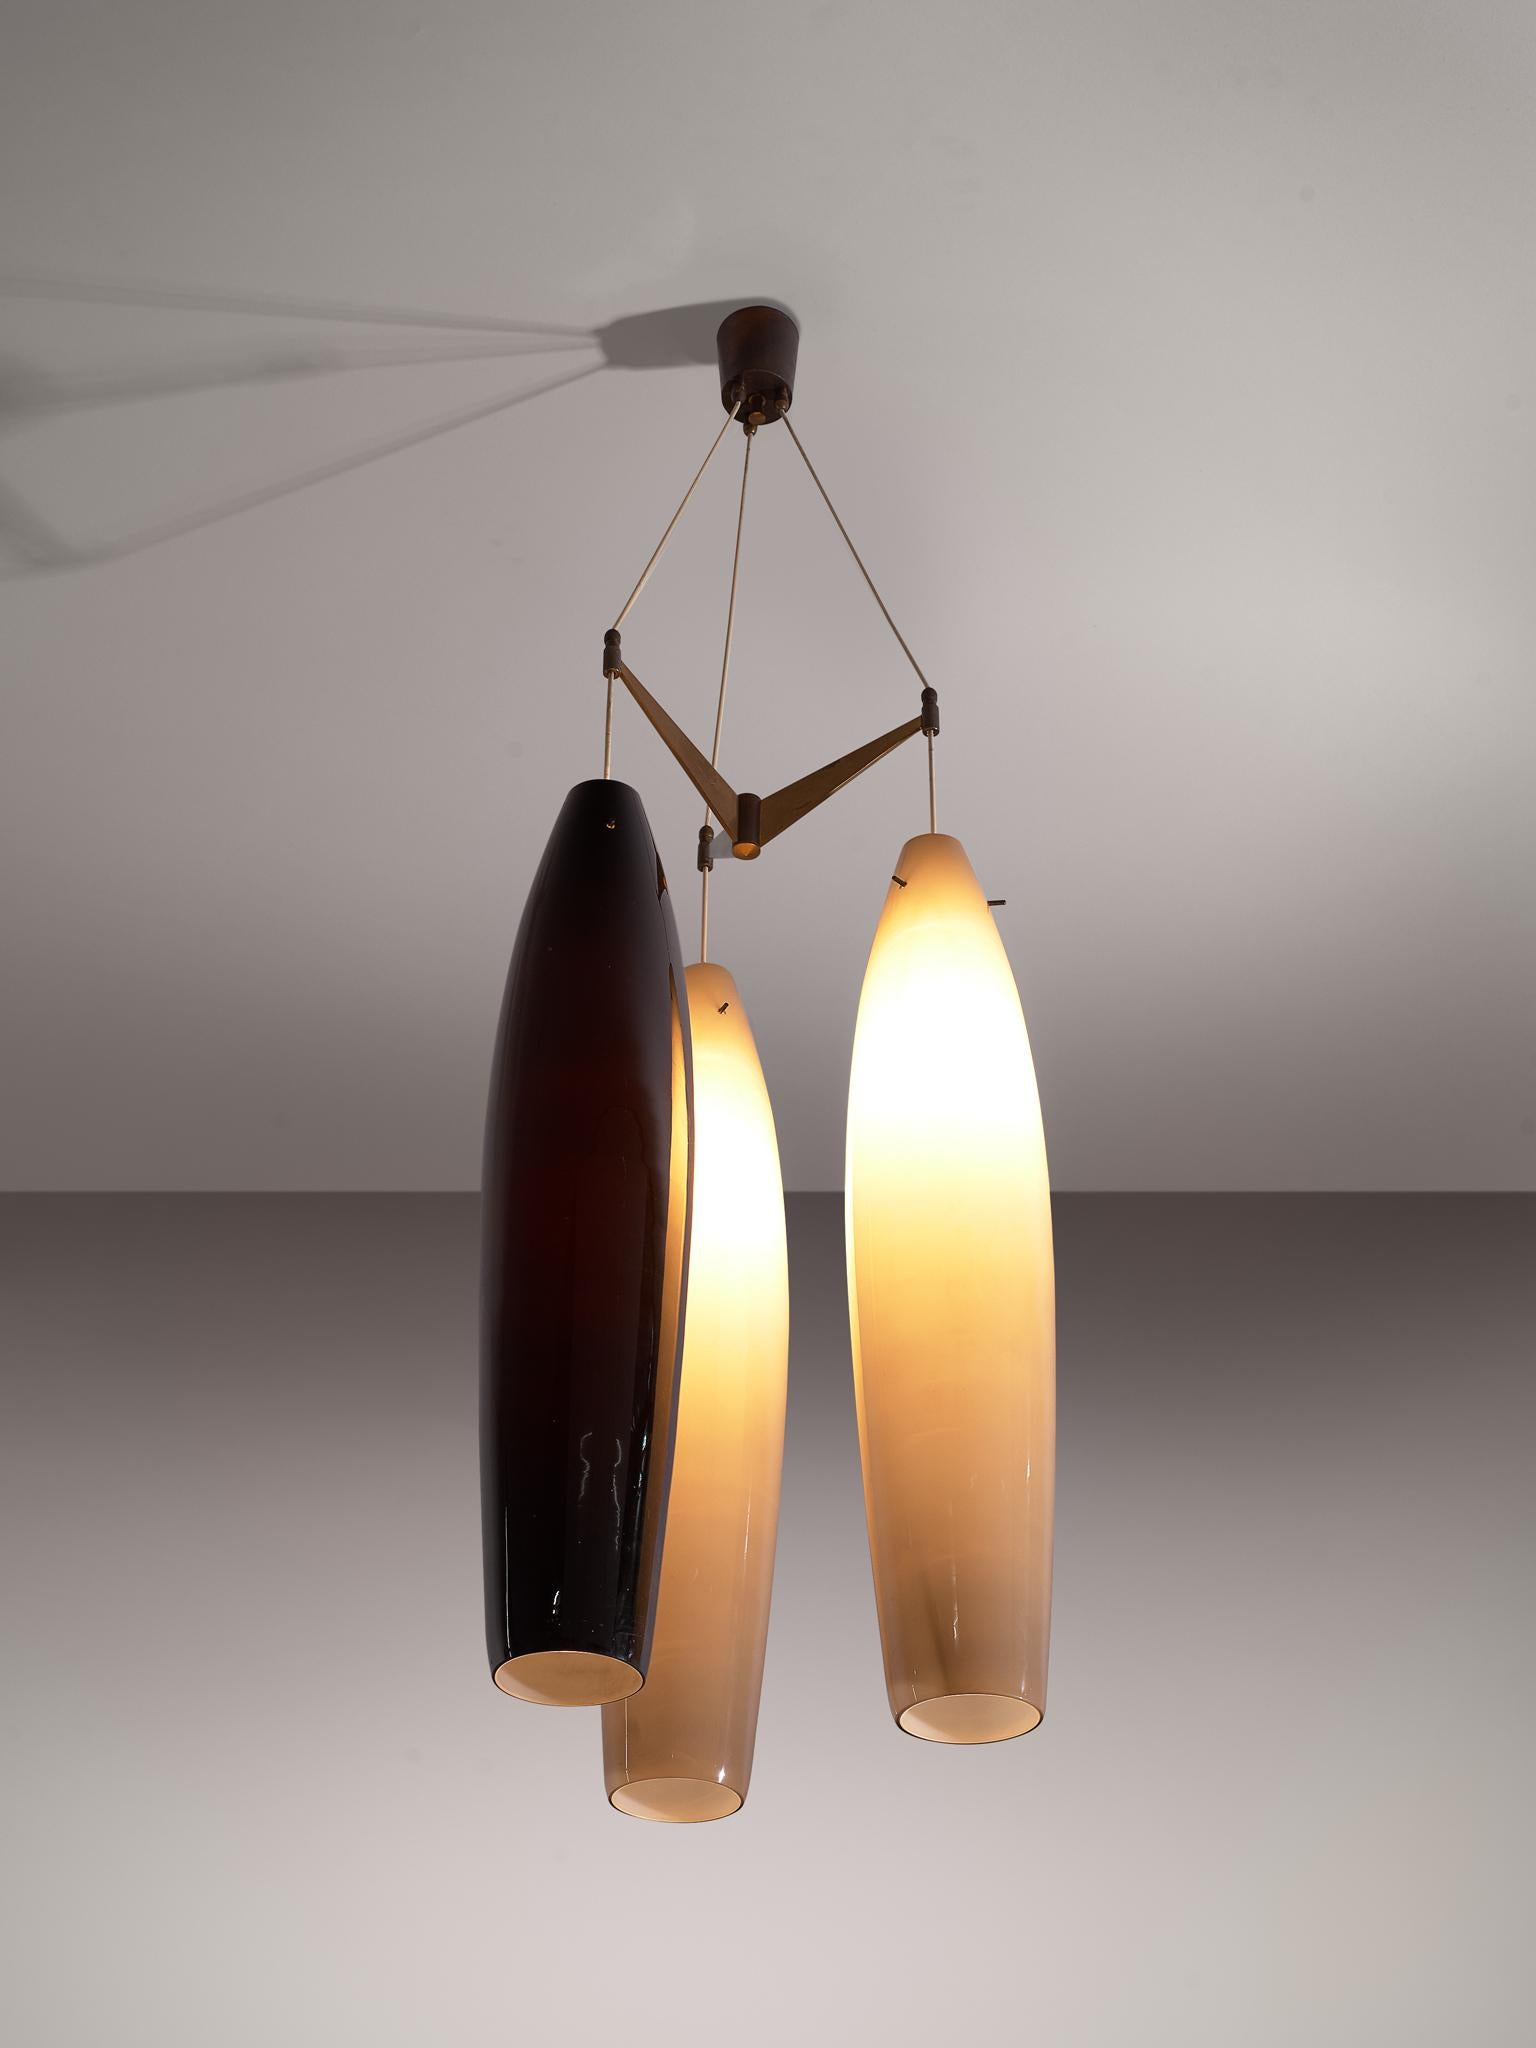 Alessandro Pianon for Vistosi Murano, pendant, glass and brass, Italy, 1960s

Stunning three-armed chandelier with blown glass pendants, two in beige and one in black, designed by Alessandro Pianon for Vistosi Murano. The three pendants are